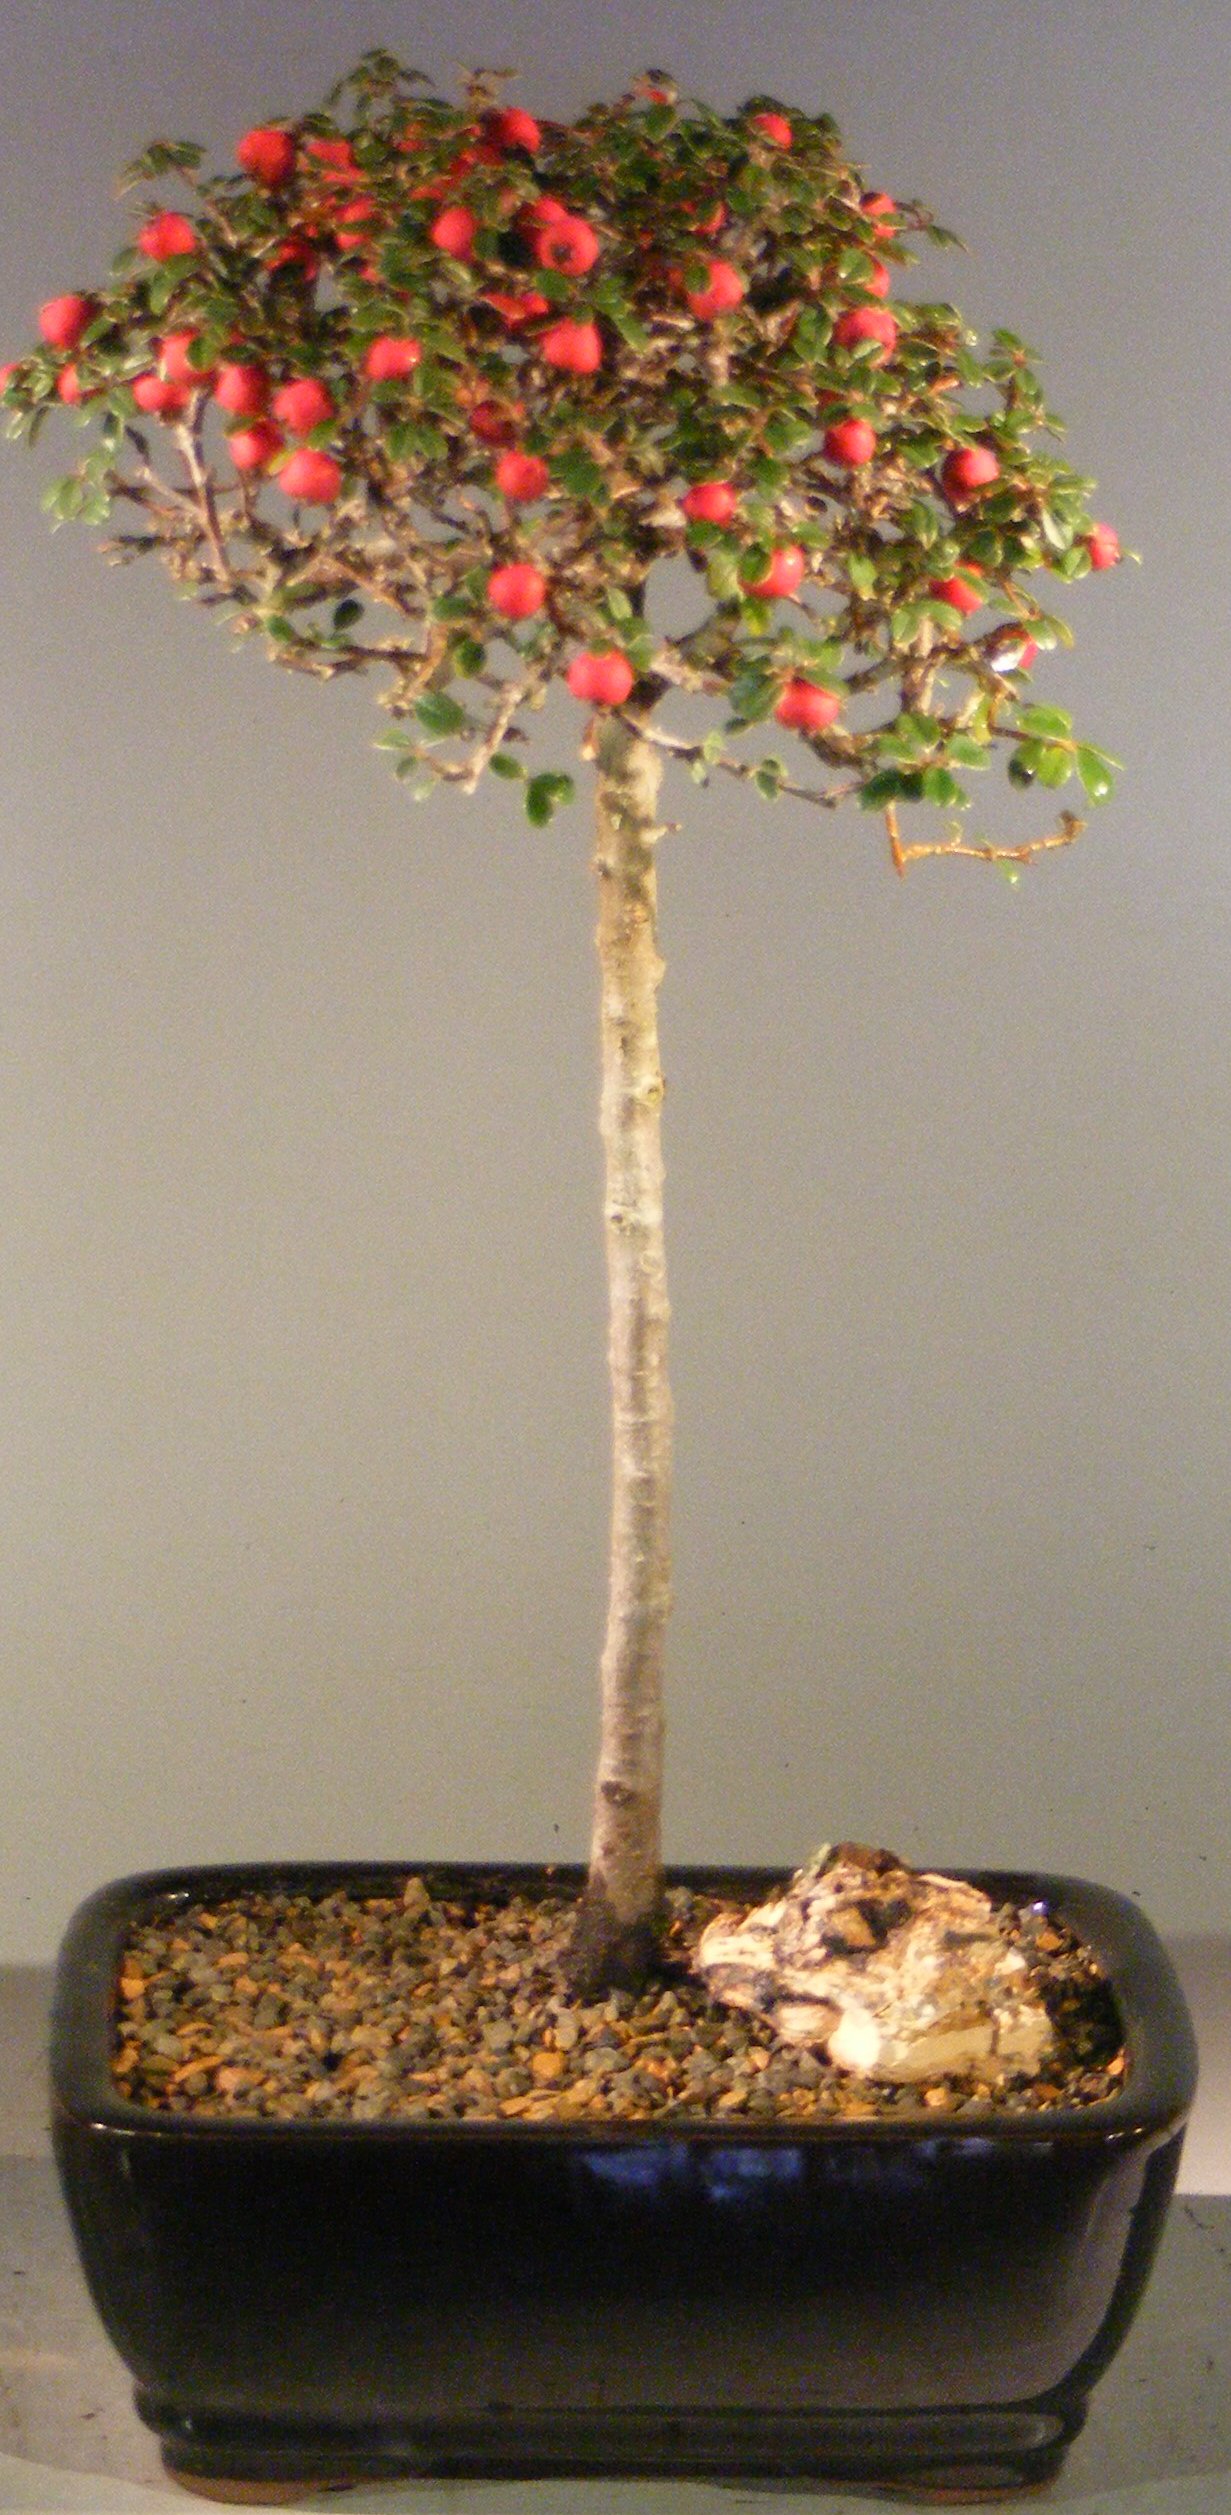 Flowering & Fruiting Evergreen Cotoneaster Bonsai Tree Upright Style(dammeri 'streibs findling') Image